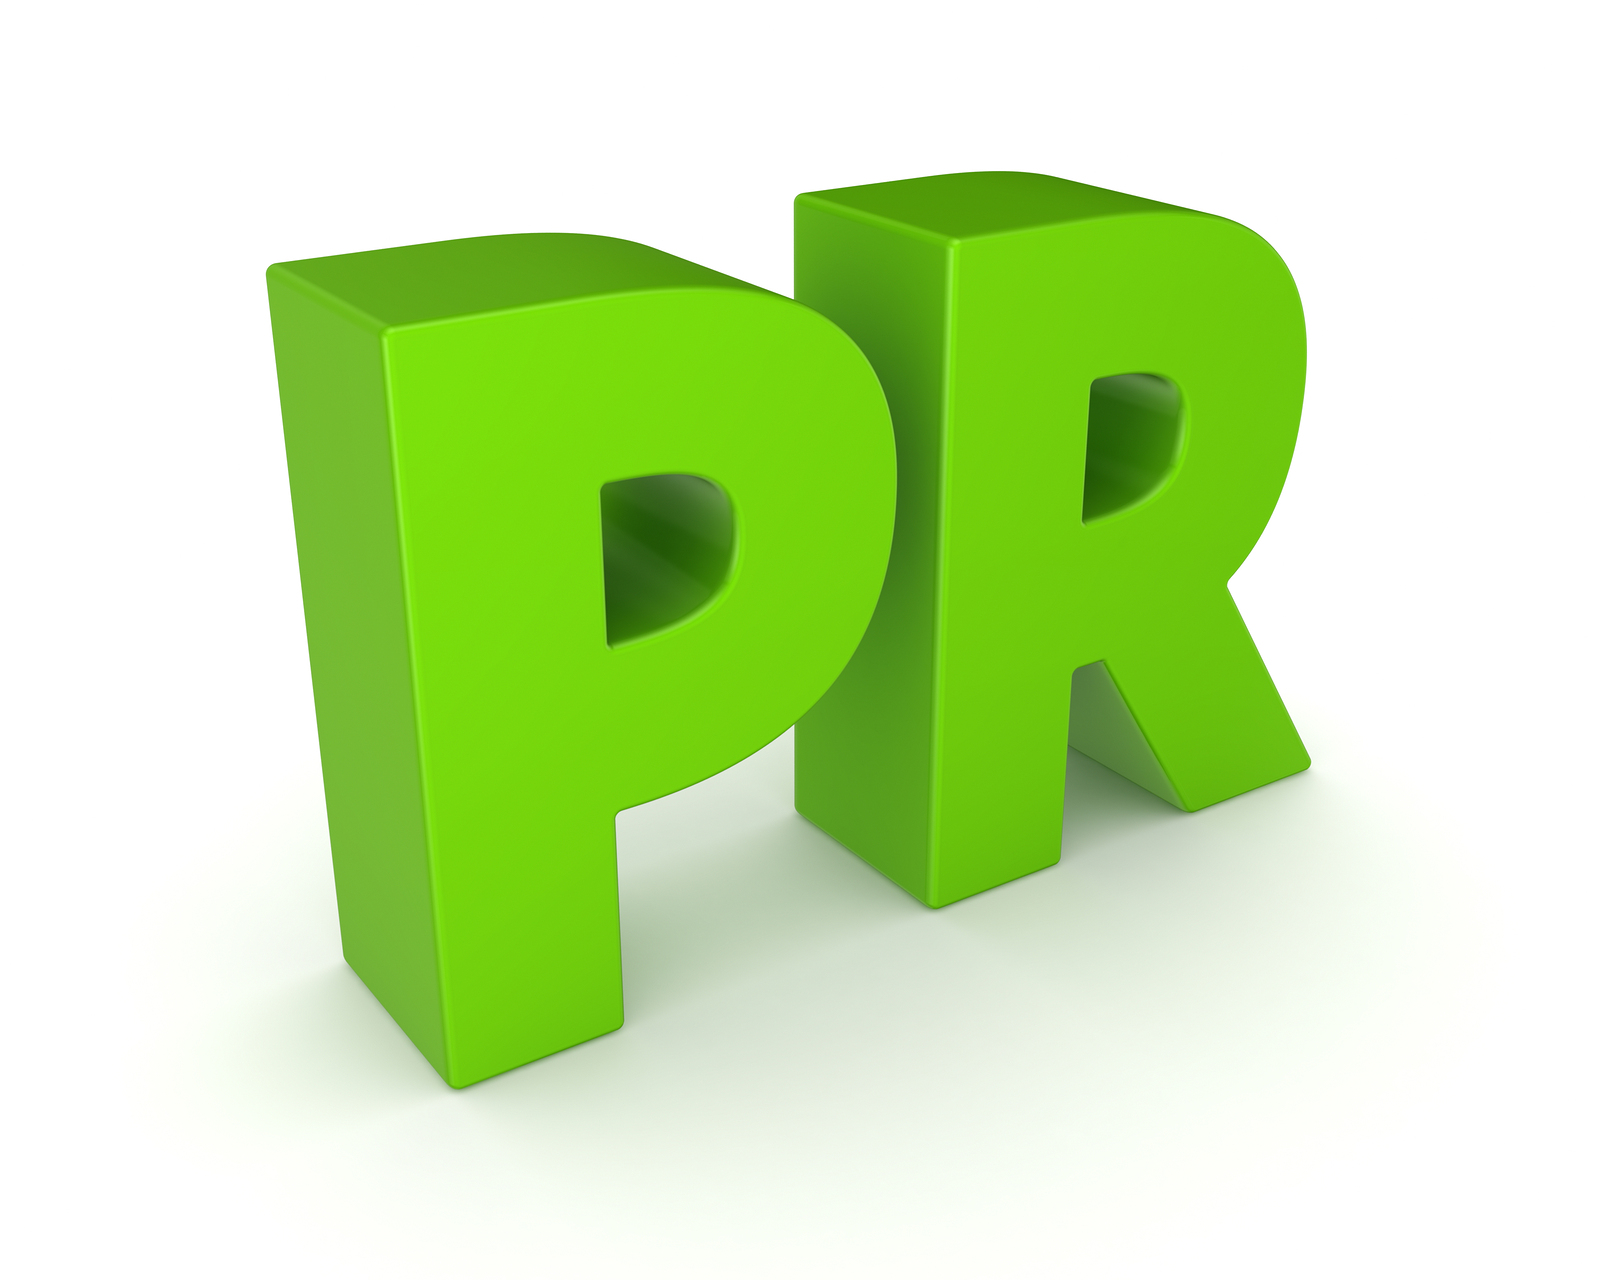 list of pr agencies in india, list of top advertising agencies in india, list of advertising agencies in delhi, top pr firms in india, top advertising agencies in delhi ncr, top advertising companies in india, leading advertising agencies in india, top ad agencies in delhi, best advertising companies in india, top advertising agencies india, top pr agencies in india, top ten advertising agencies in india, event management agency, best pr companies in india, Best advertising agencies, INS accredited advertising, Advertising agencies in Gurgaon, Creative marketing, How to Design a brand, Digital media services, Hoarding advertising services, BTL advertising, leading outdoor advertising, advertising company, newspaper ad, best advertising agency in Delhi, newspaper advertising agencies, business growth, Digital Marketing Consultancy, PR companies in India, reliable PR agencies, hire PR and media, leading PR agencies in Delhi NCR, Is PR effective for businesses